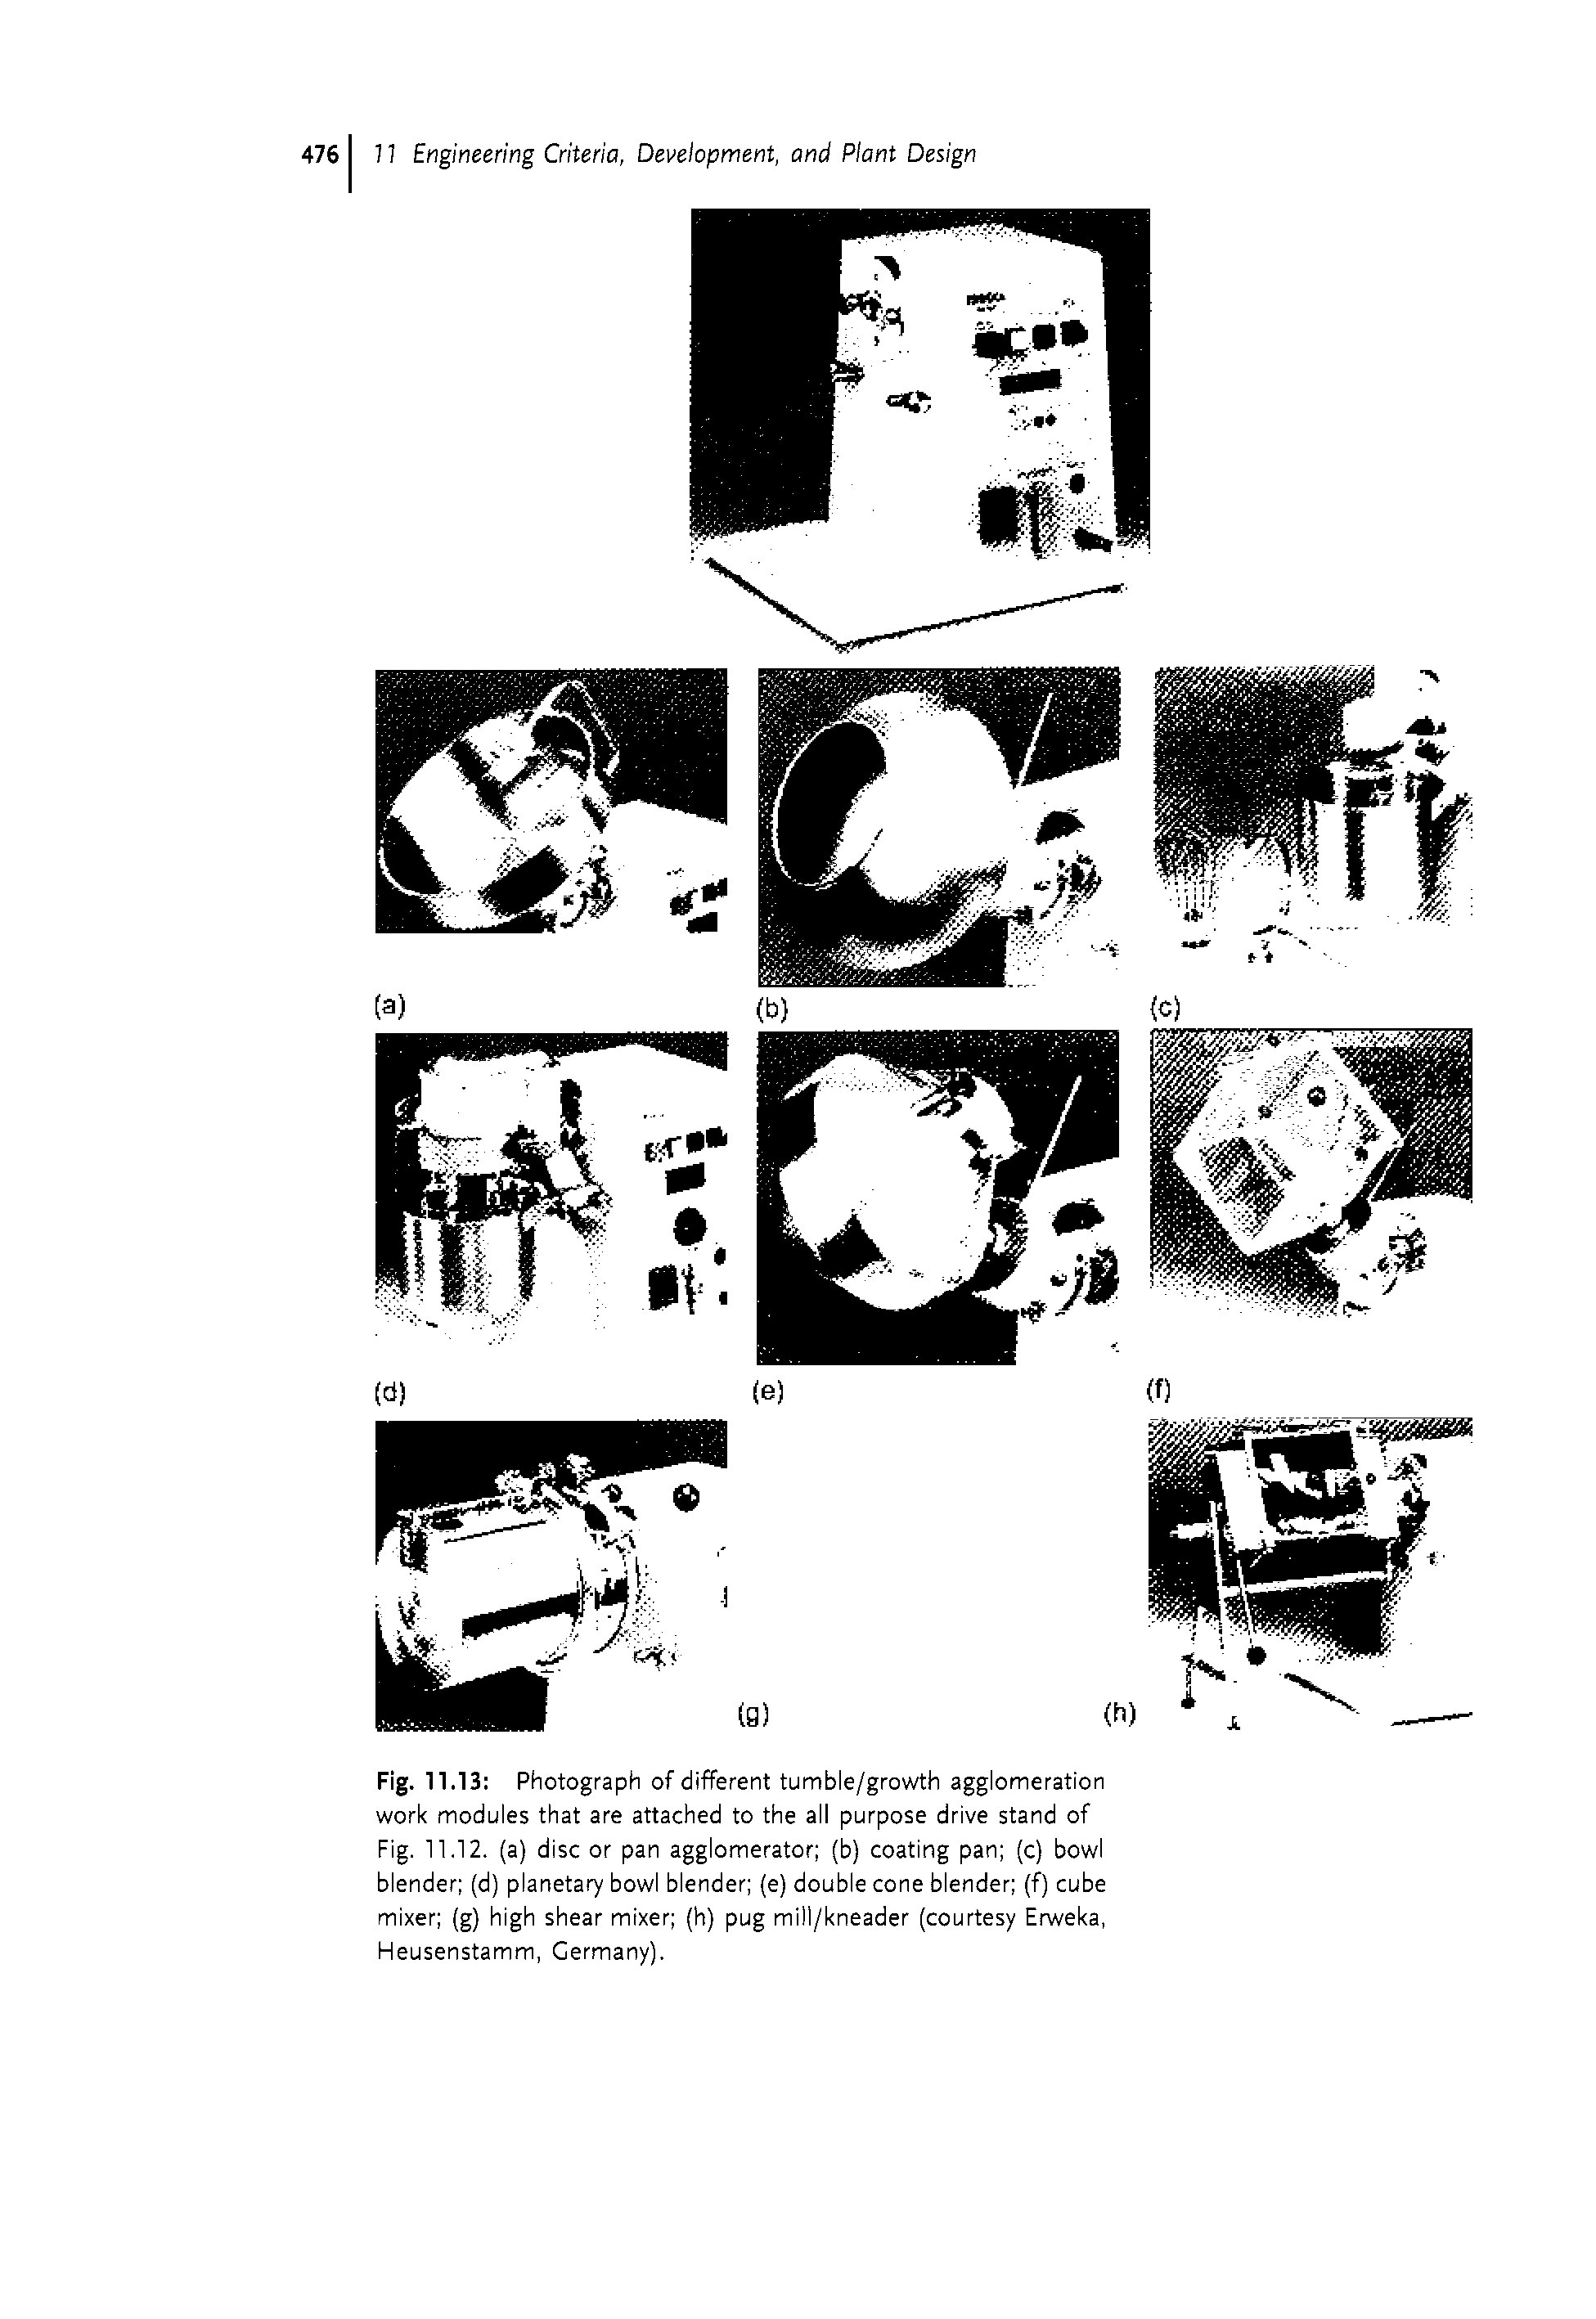 Fig. 11.13 Photograph of different tumble/growth agglomeration work modules that are attached to the all purpose drive stand of Fig. 11.12. (a) disc or pan agglomerator (b) coating pan (c) bowl blender (d) planetary bowl blender (e) double cone blender (f) cube mixer (g) high shear mixer (h) pug mill/kneader (courtesy Erweka, Heusenstamm, Germany).